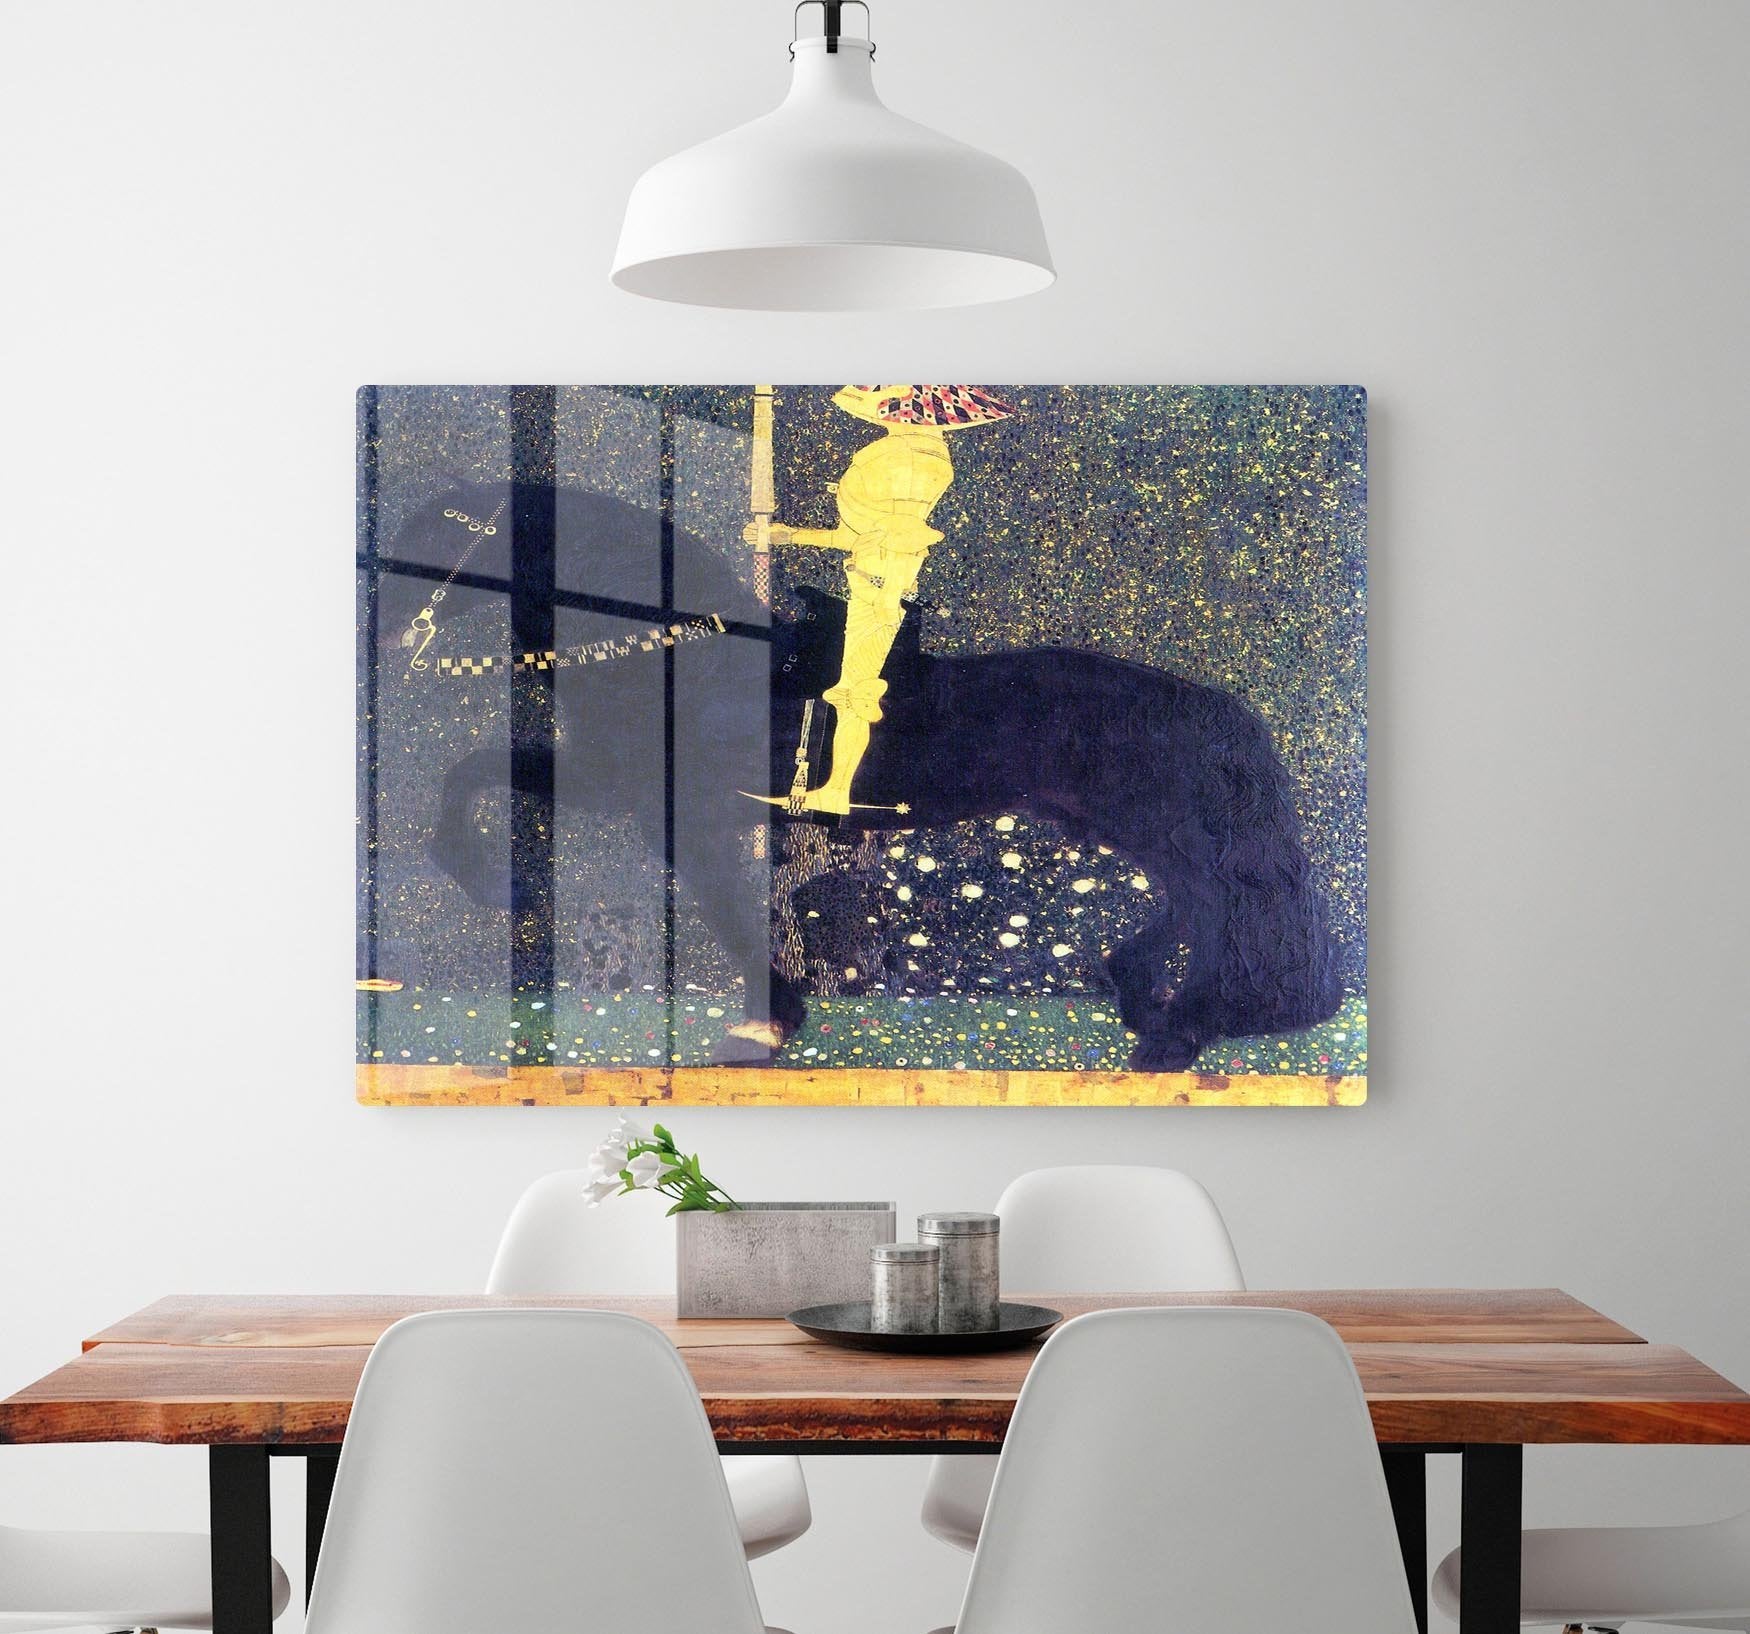 The life of a struggle The Golden Knights by Klimt HD Metal Print